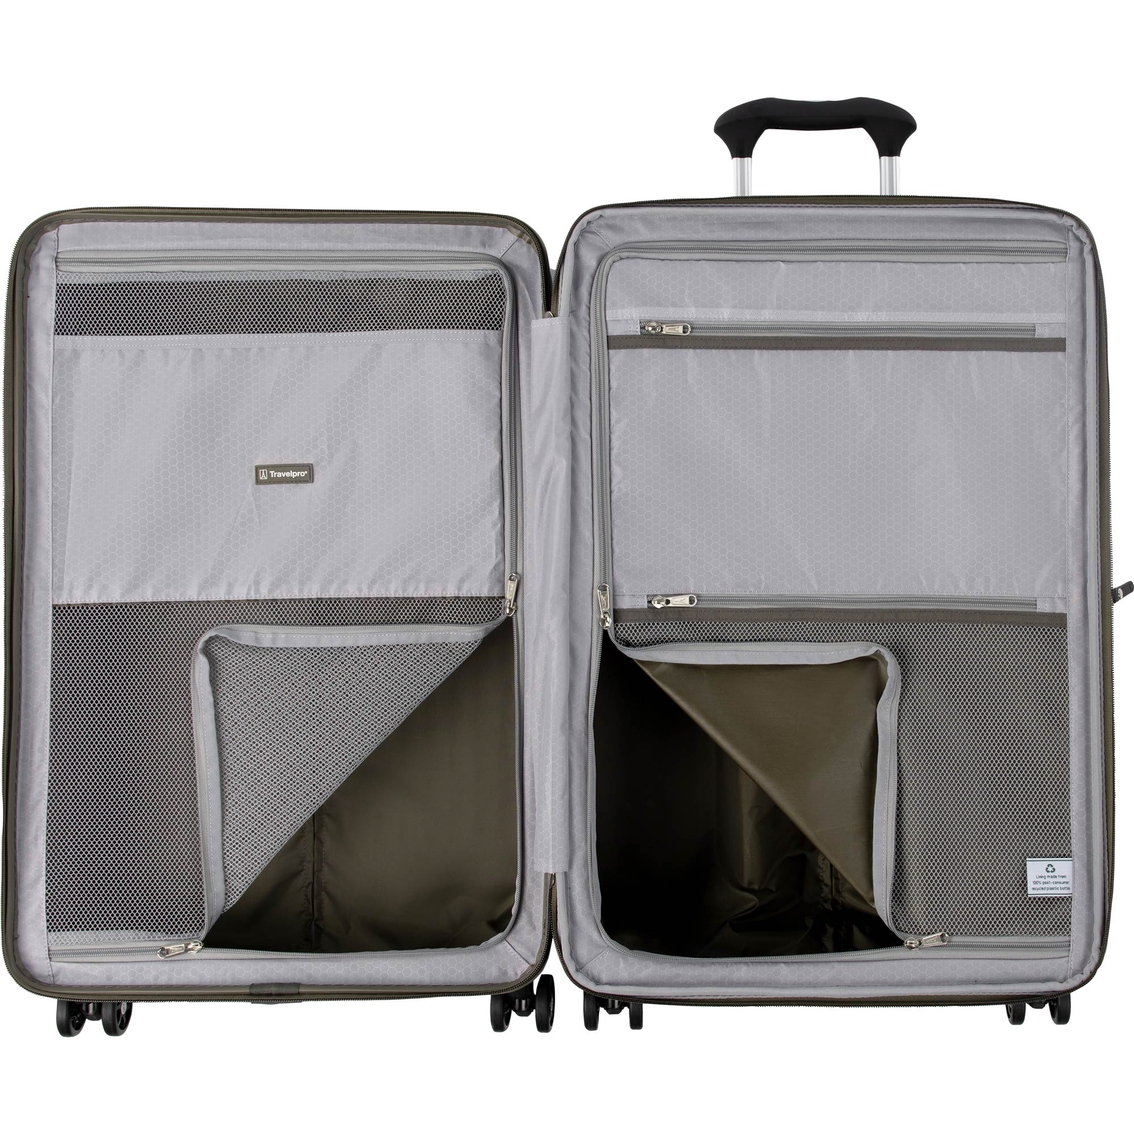 Travelpro Maxlite Air 27.5 in. Medium Check-In Expandable Hardside Spinner - Image 7 of 10